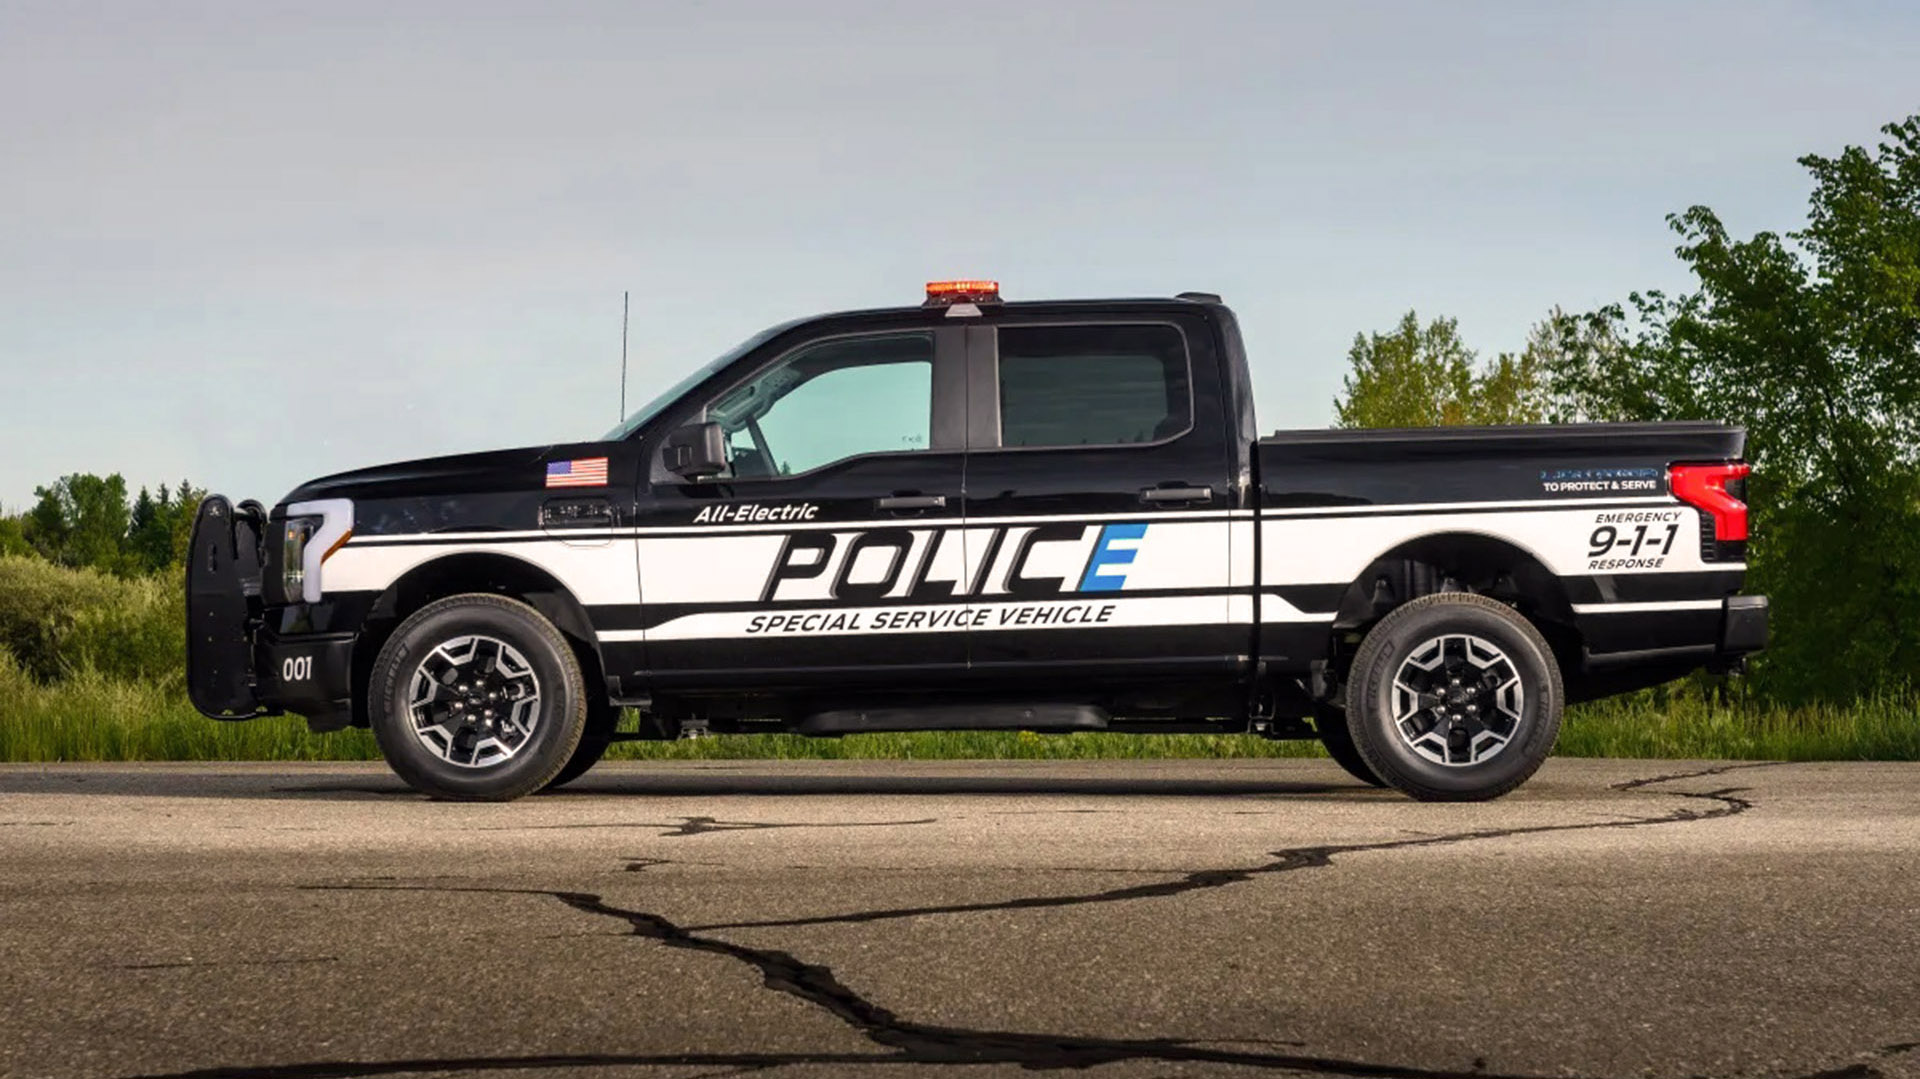 The imposing profile of the F-150 Pro SSV, a vital part of the action of a police squad